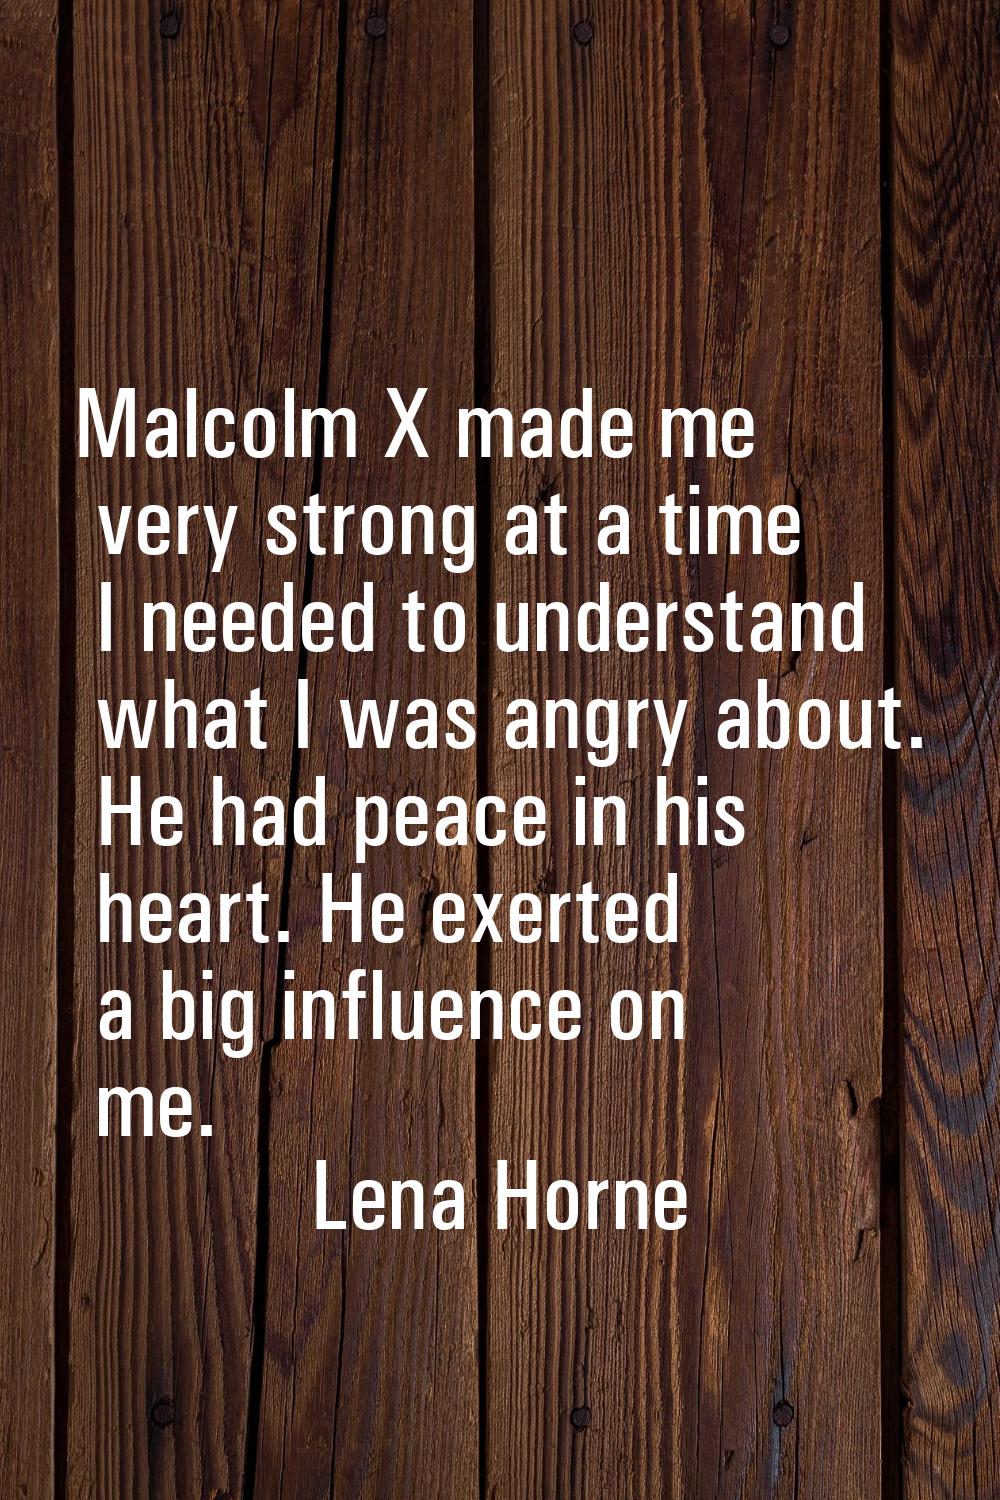 Malcolm X made me very strong at a time I needed to understand what I was angry about. He had peace